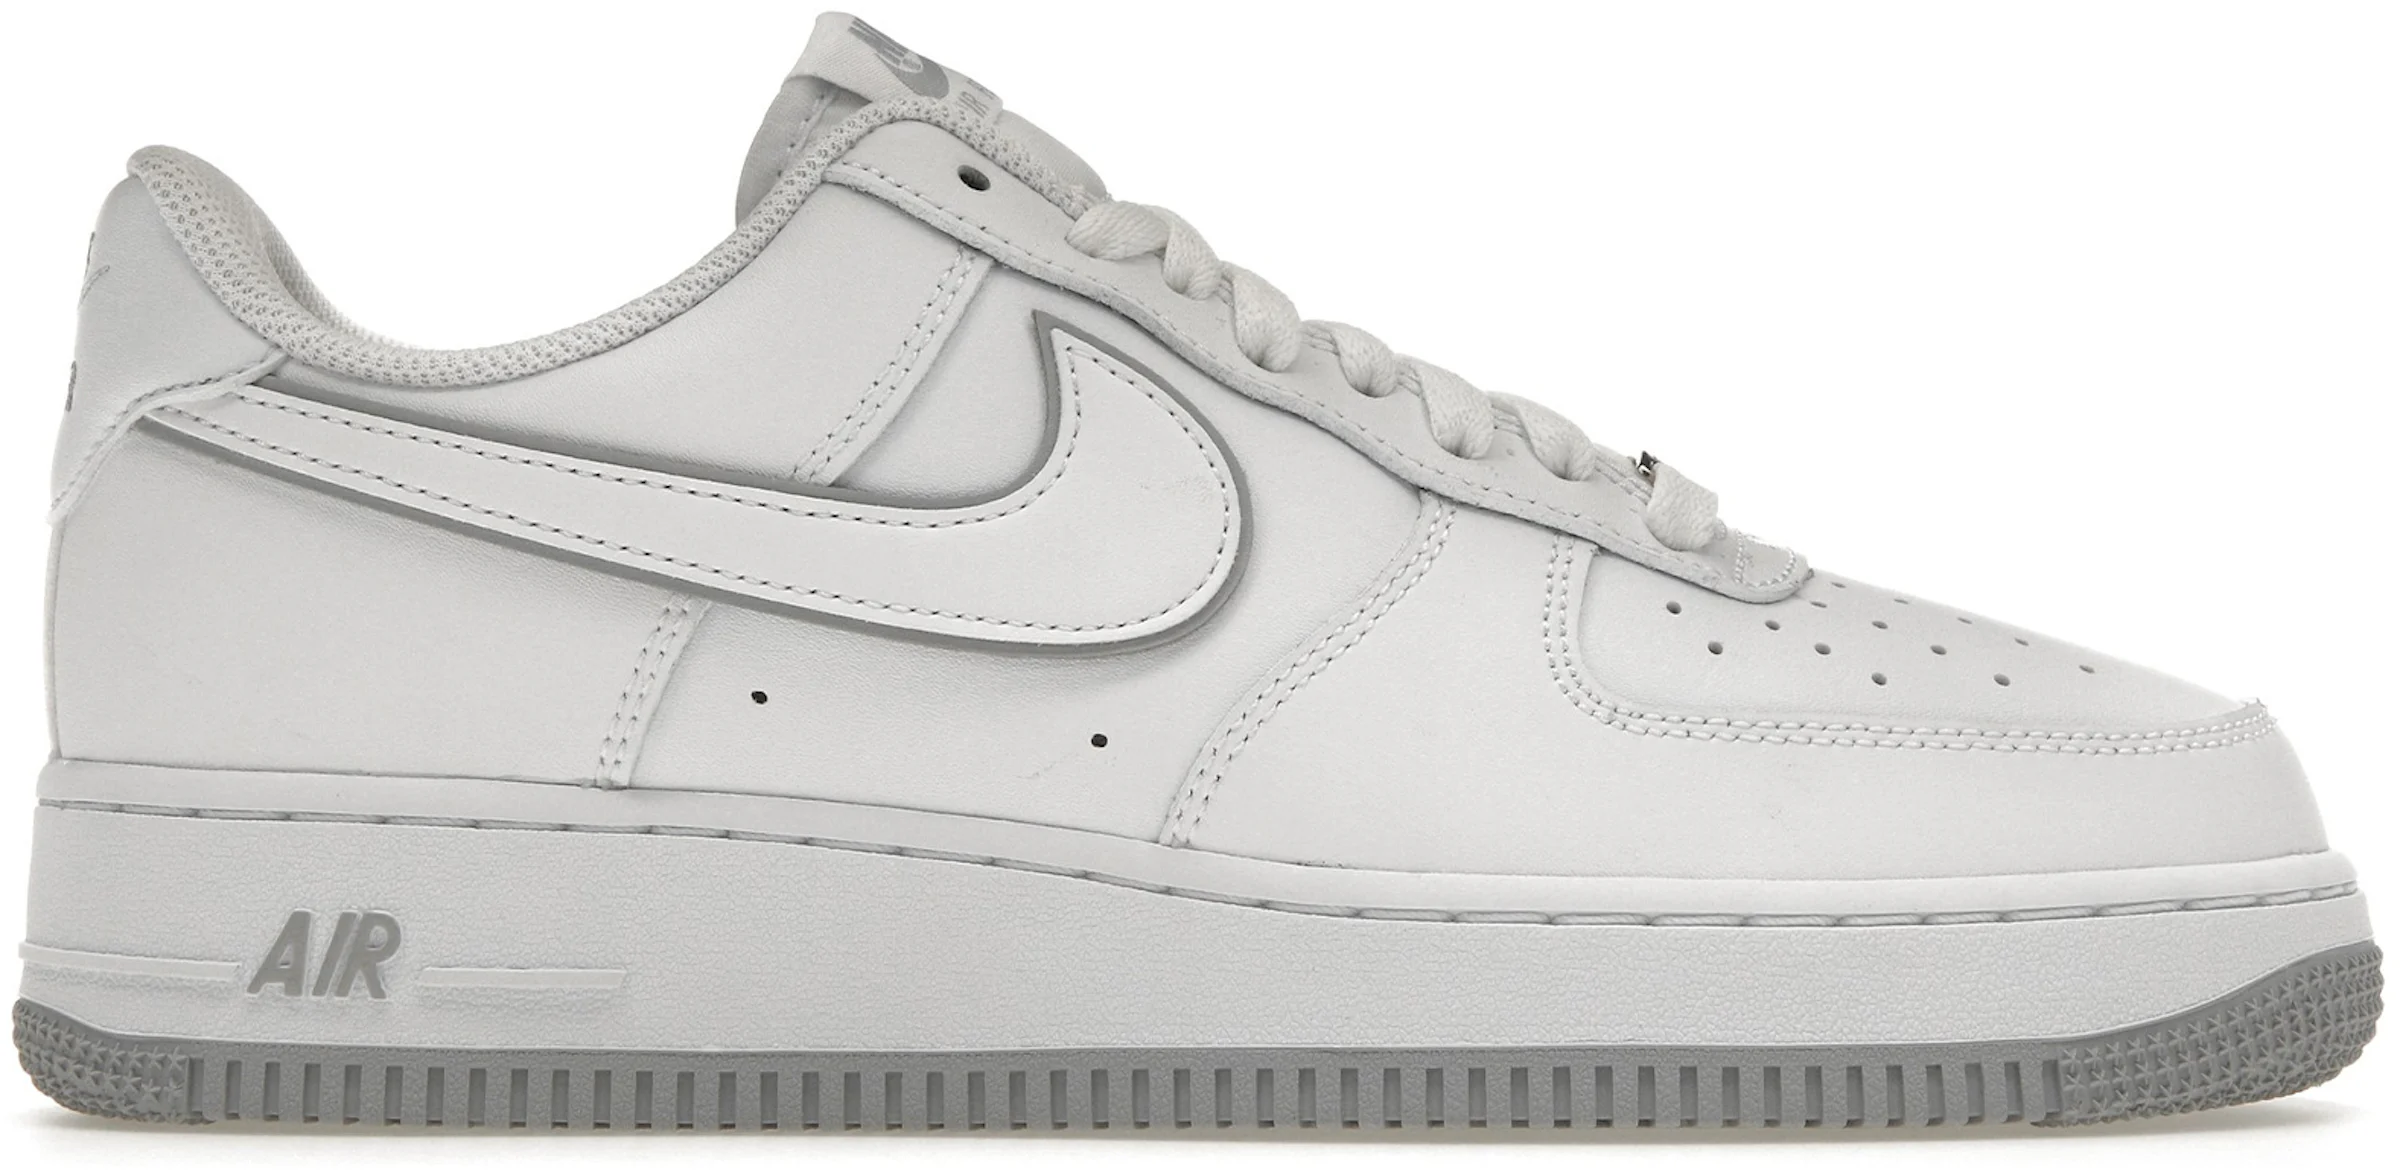 Nike Air Force 1 '07 Low White Wolf Grey Sole Men's - DV0788-100 - US